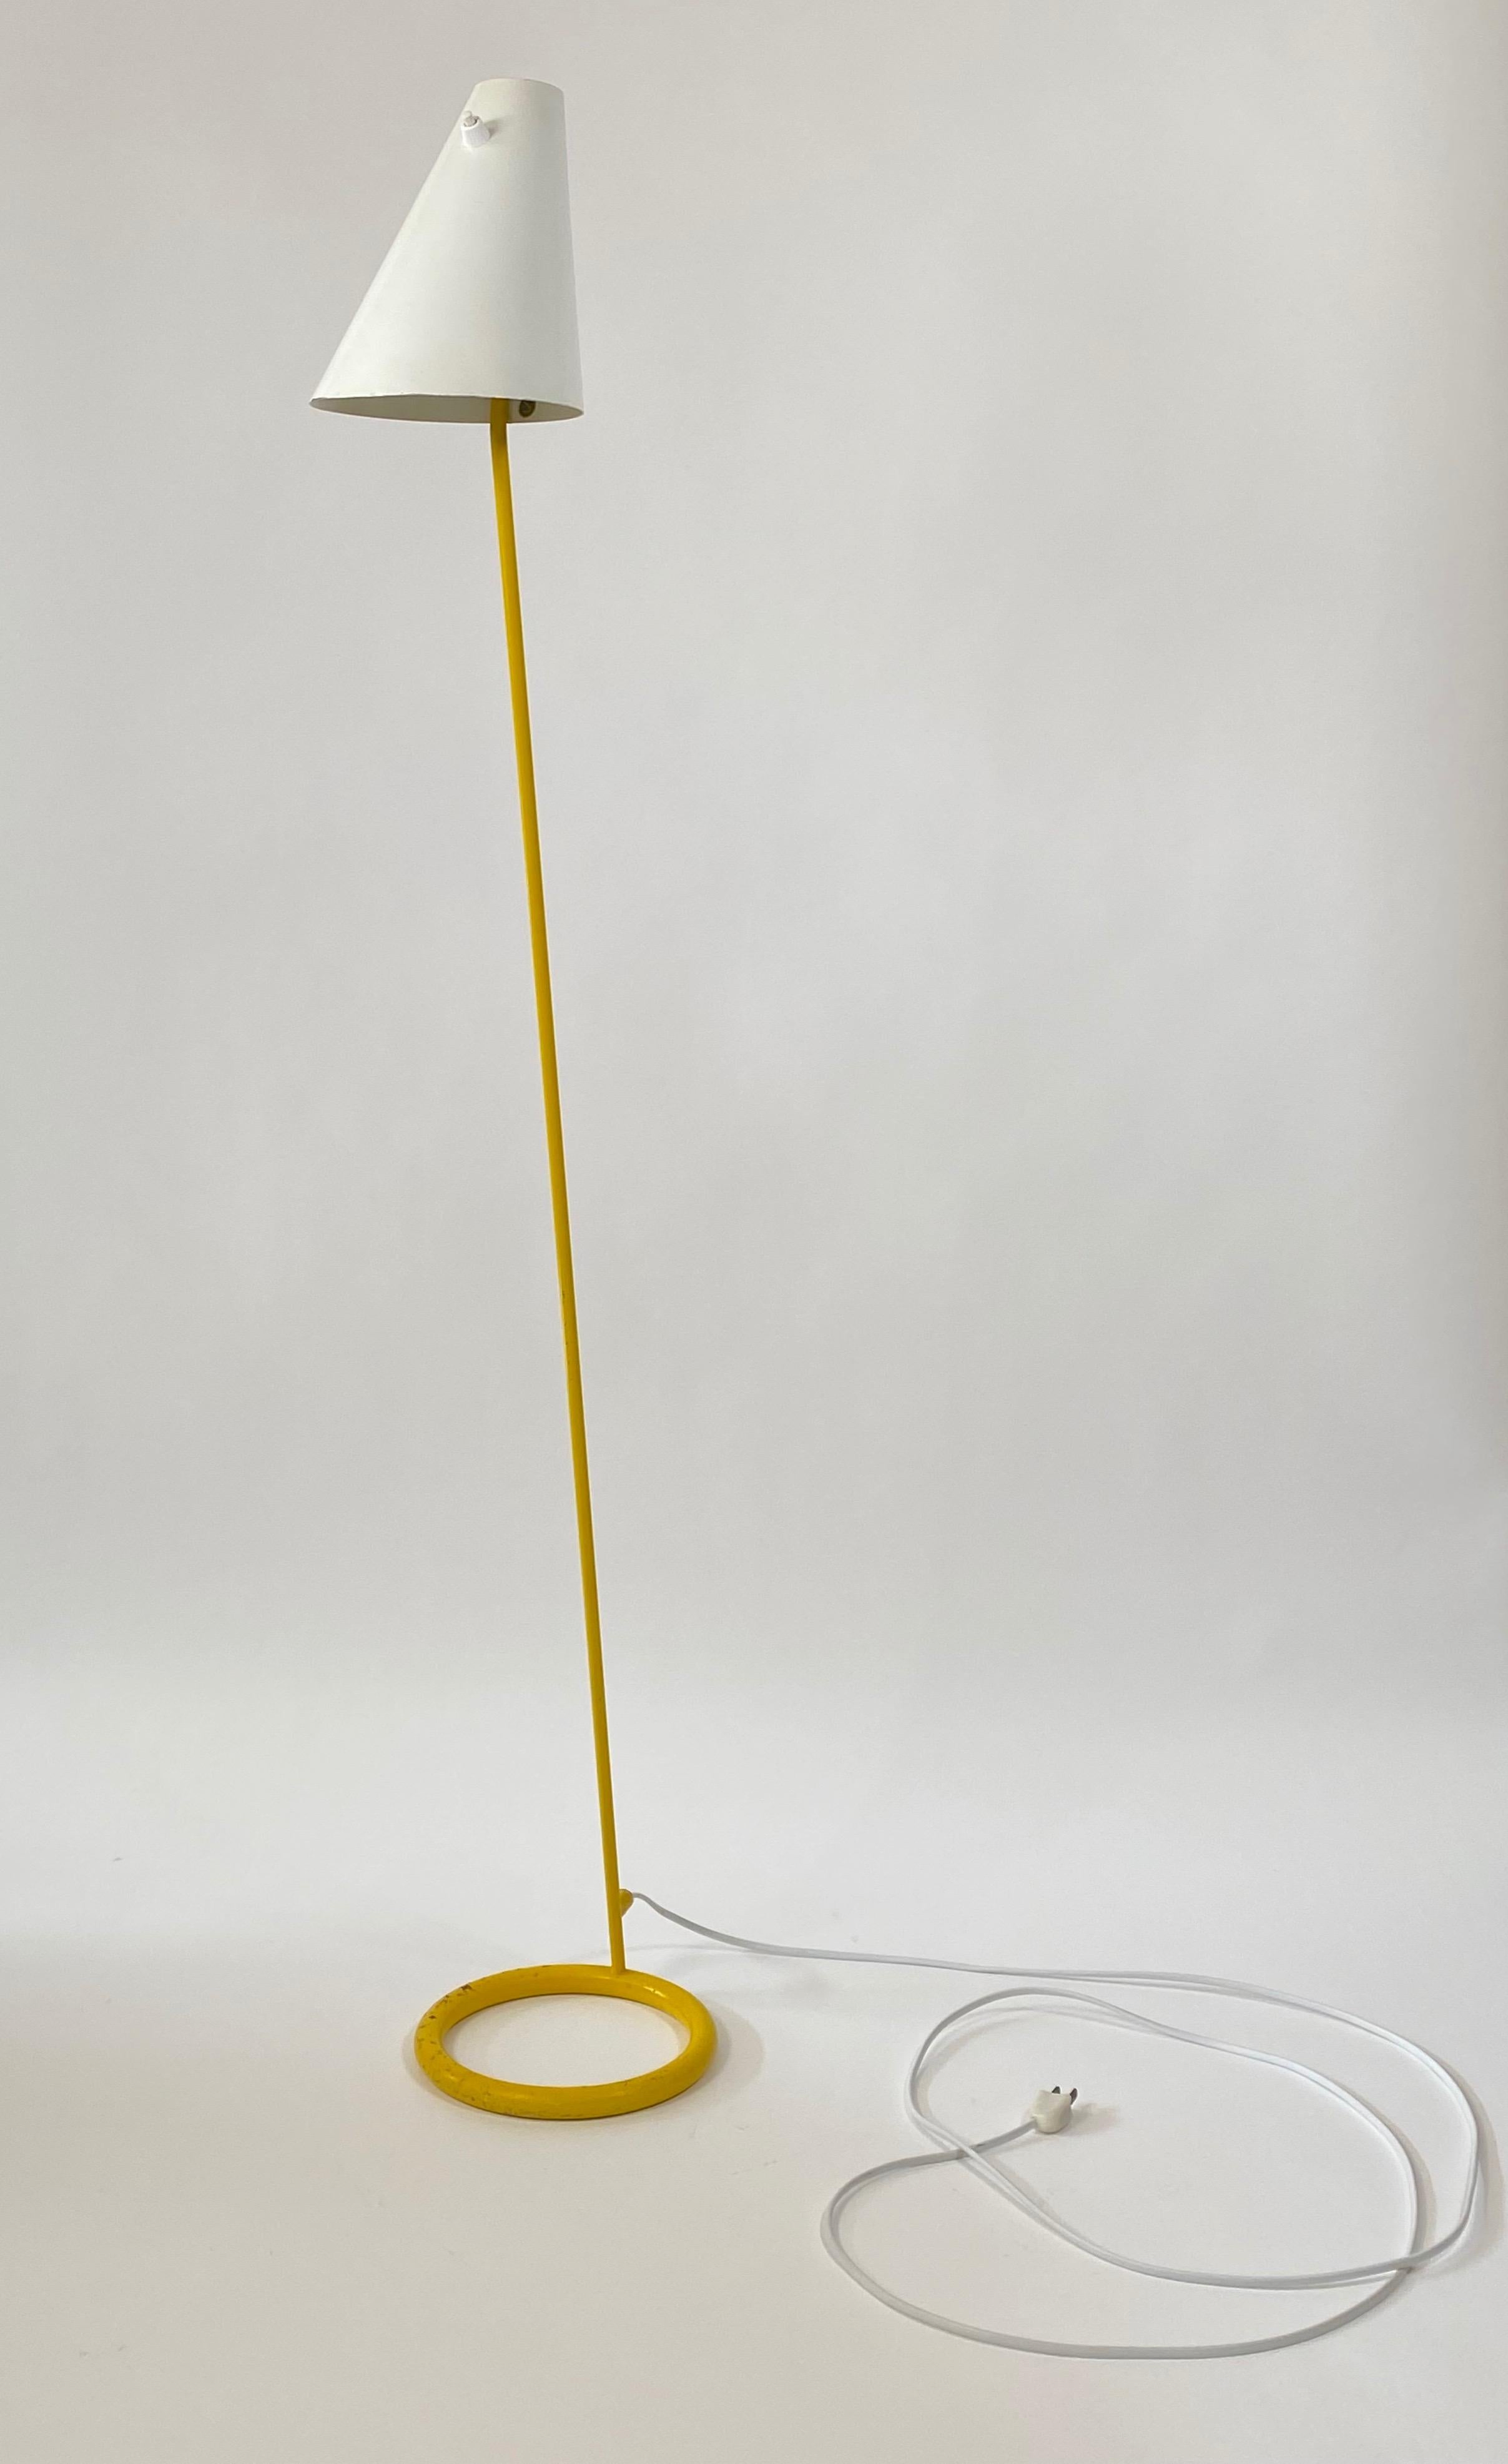 Floor lamp by Hans-Agne Jakobsson for Haj Markaryd of Sweden. We keep the original finish with its patina and rewired the lamp as per it original specifications, ordering parts from Europe. The lamp has a weighted steel ring base in yellow with an